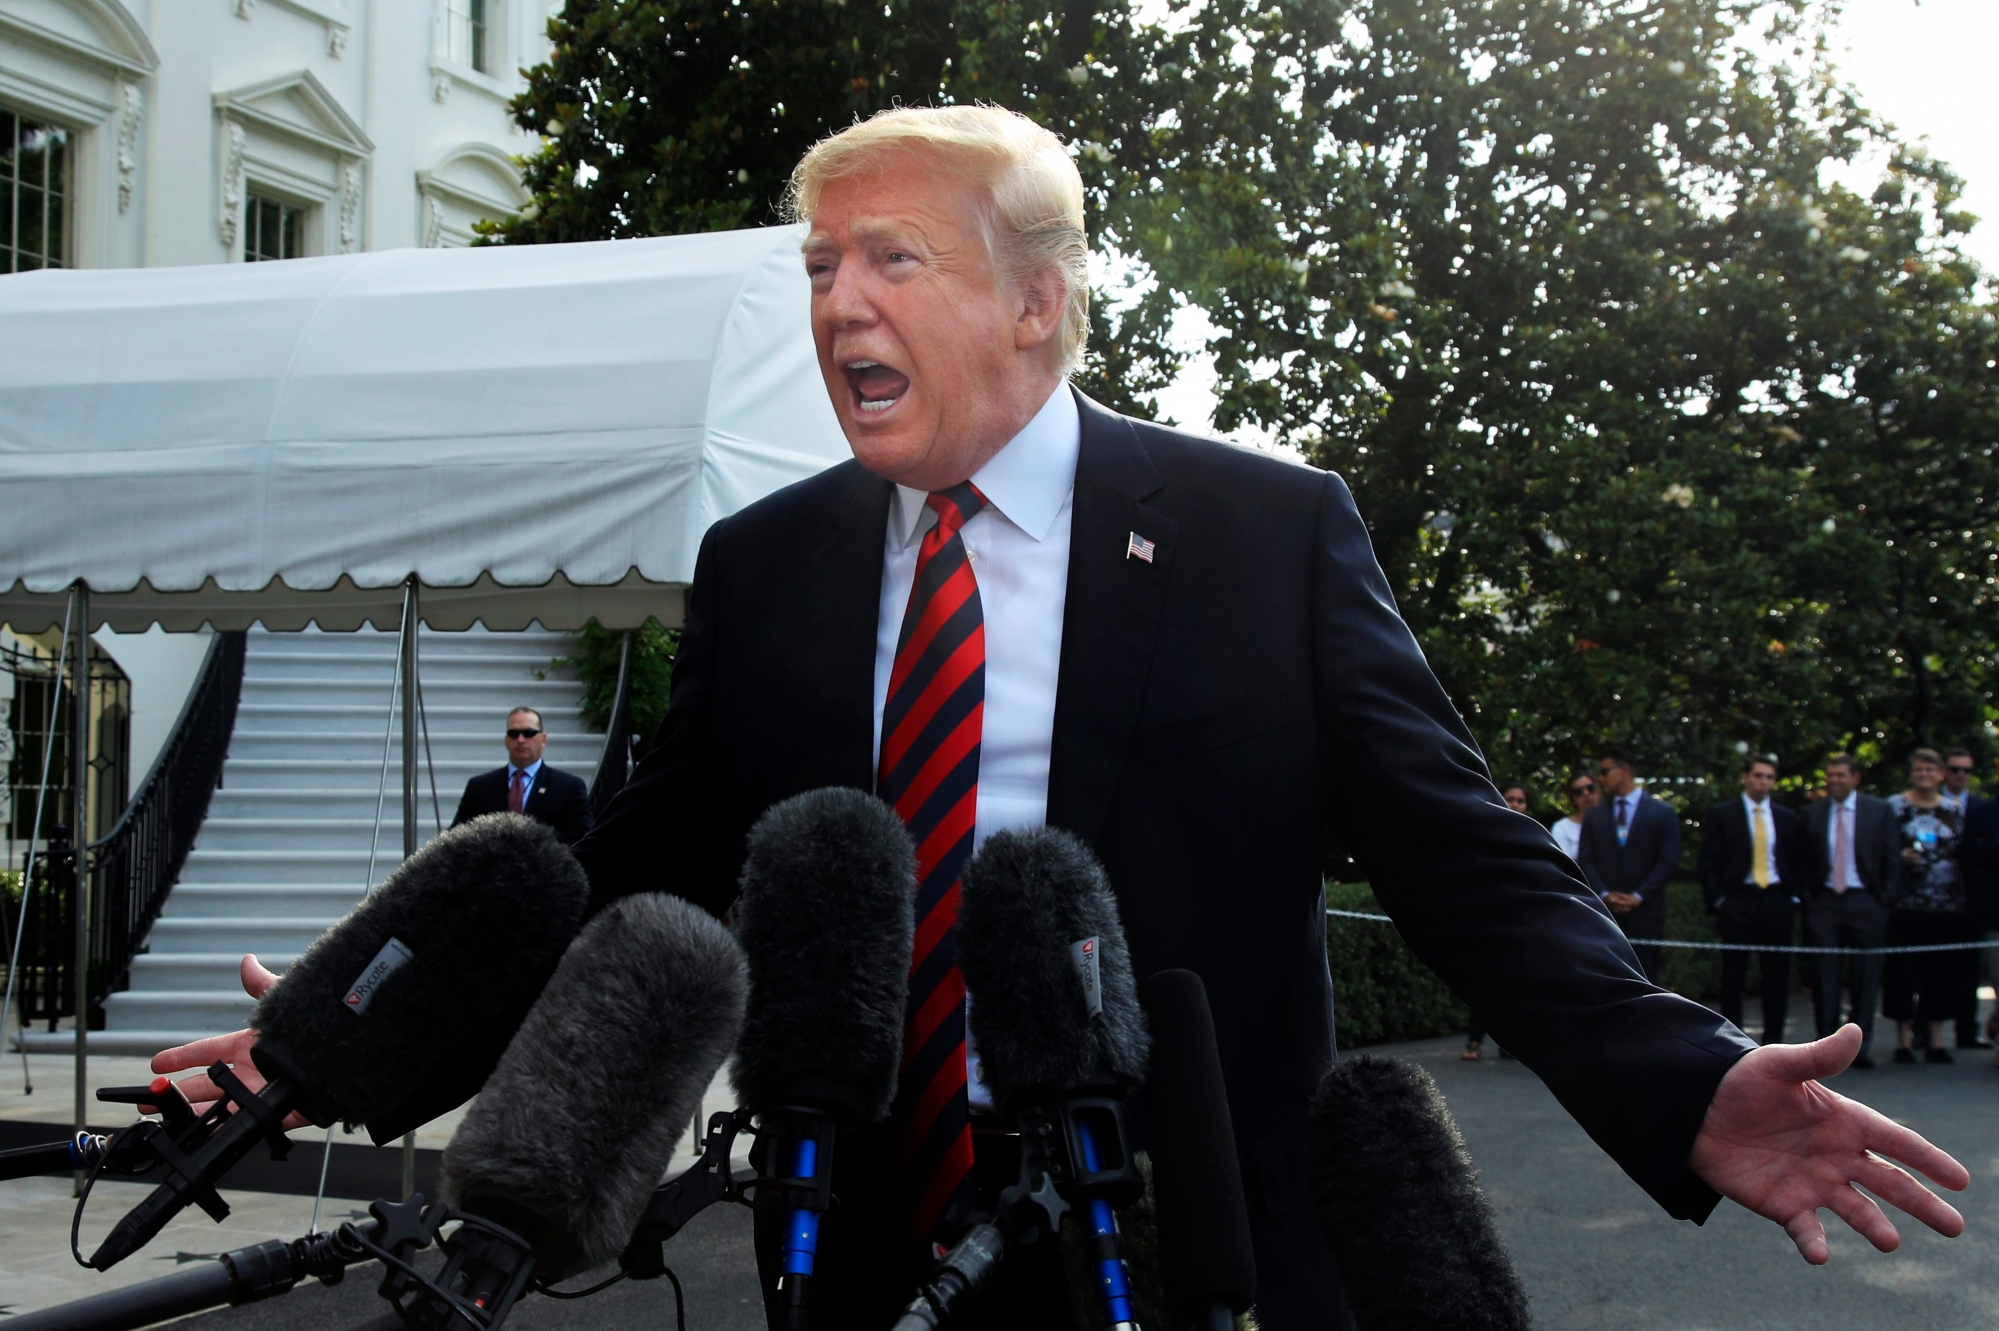 President Donald Trump speaks to reporters before leaving the White House in Washington, Friday, June 8, 2018, to attend the G7 Summit in Charlevoix, Quebec, Canada. (AP Photo/Manuel Balce Ceneta) Trump